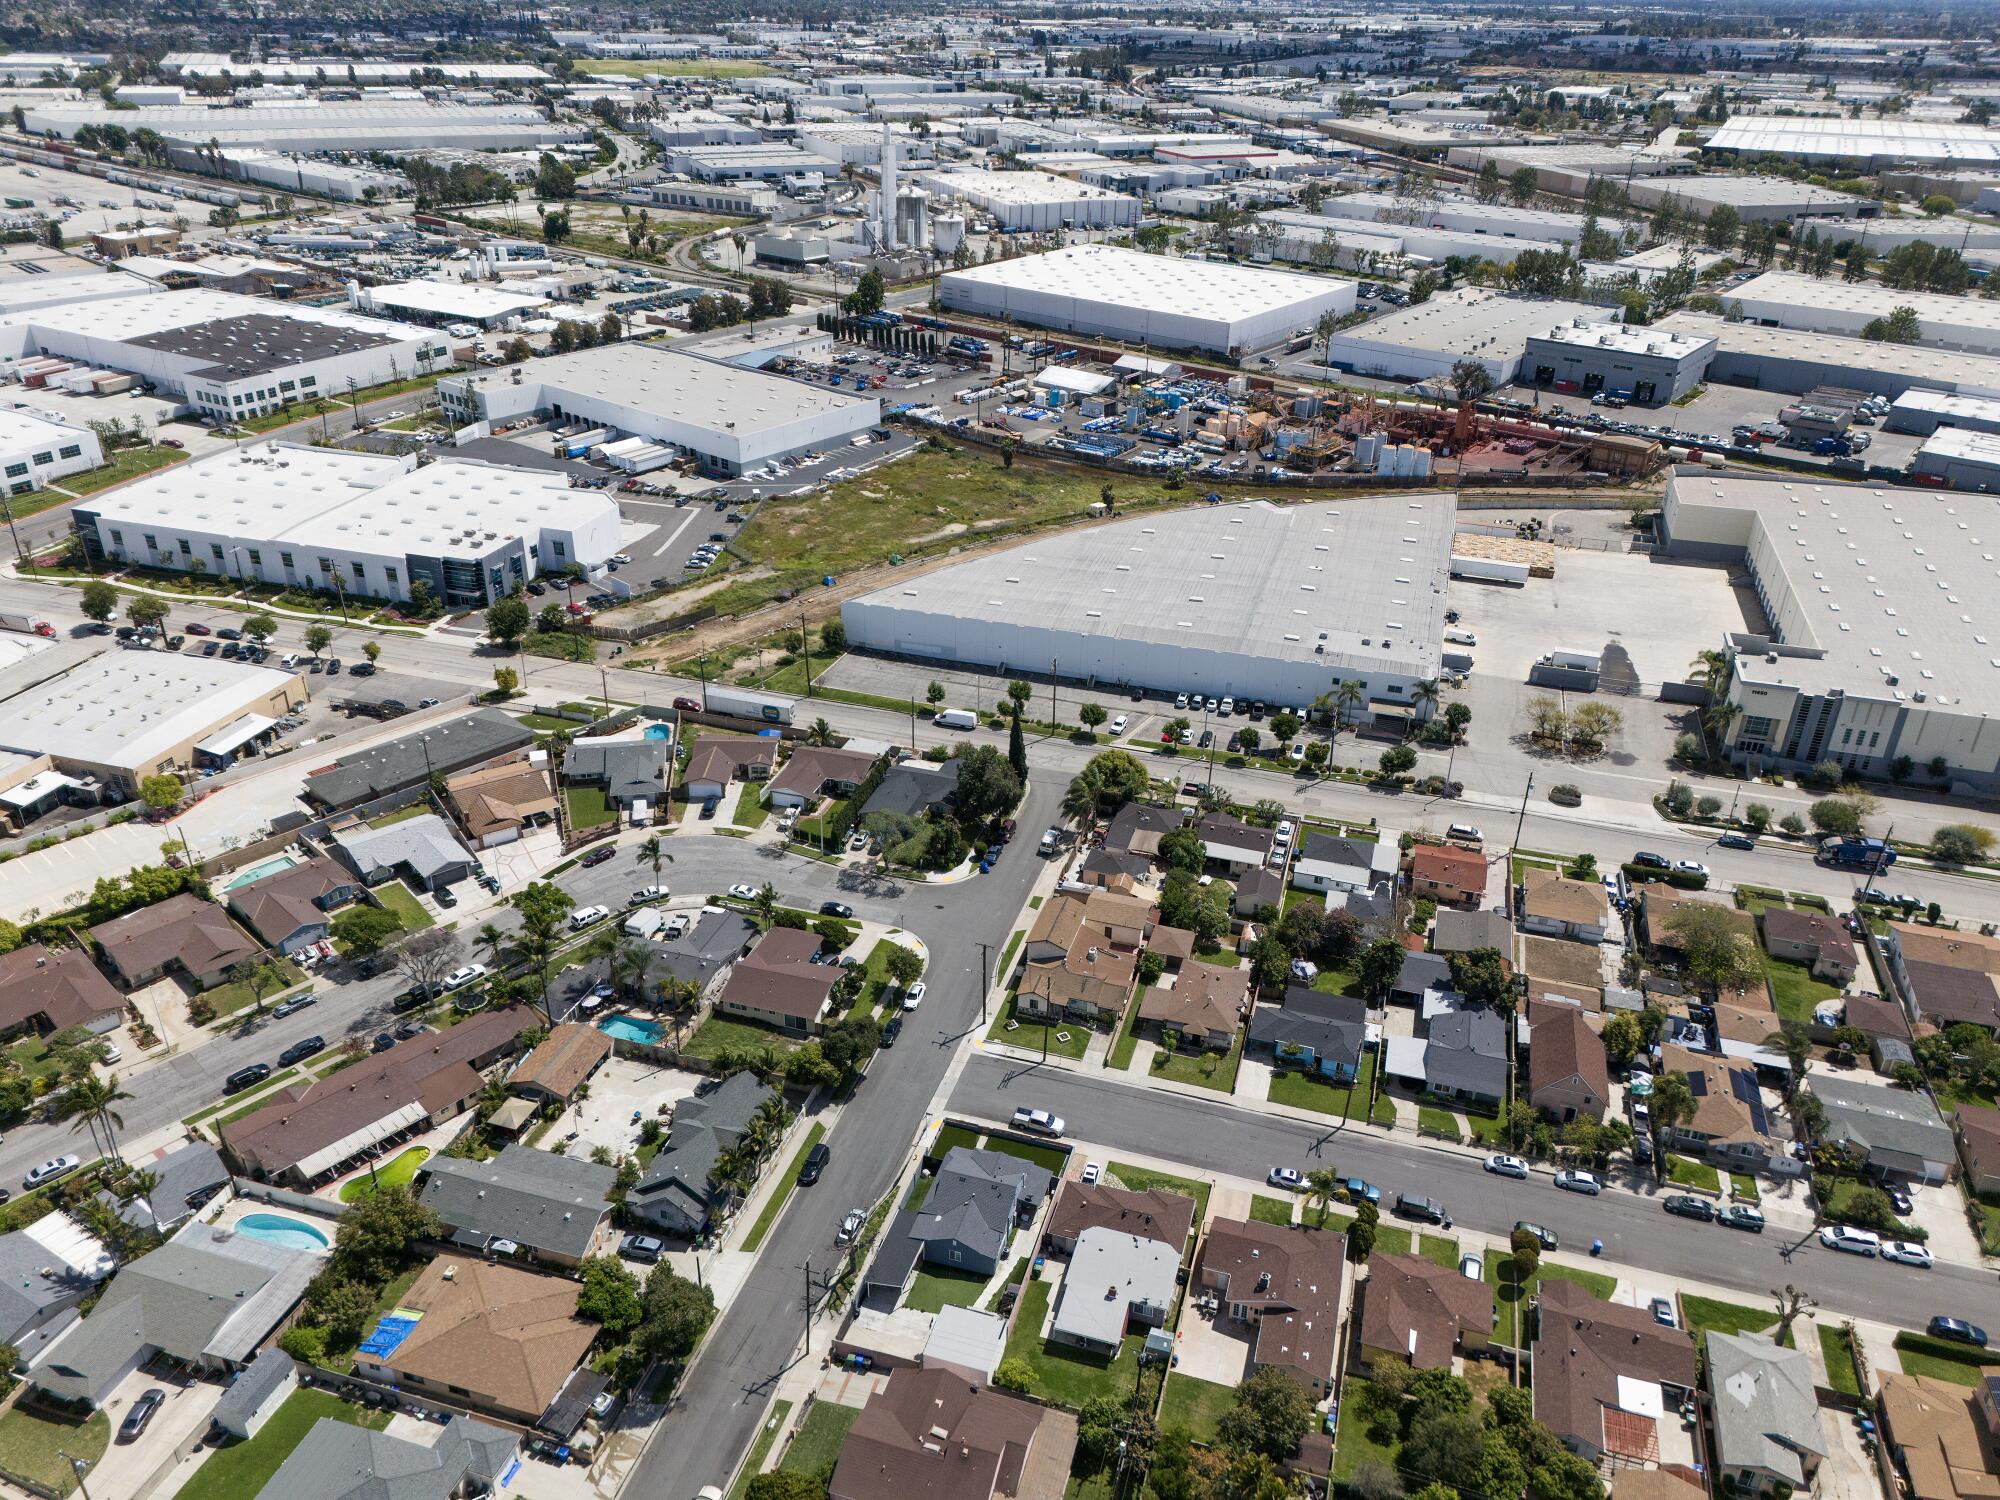 Homes in the foreground of this overhead image are close to industrial businesses, including a hazardous waste facility.